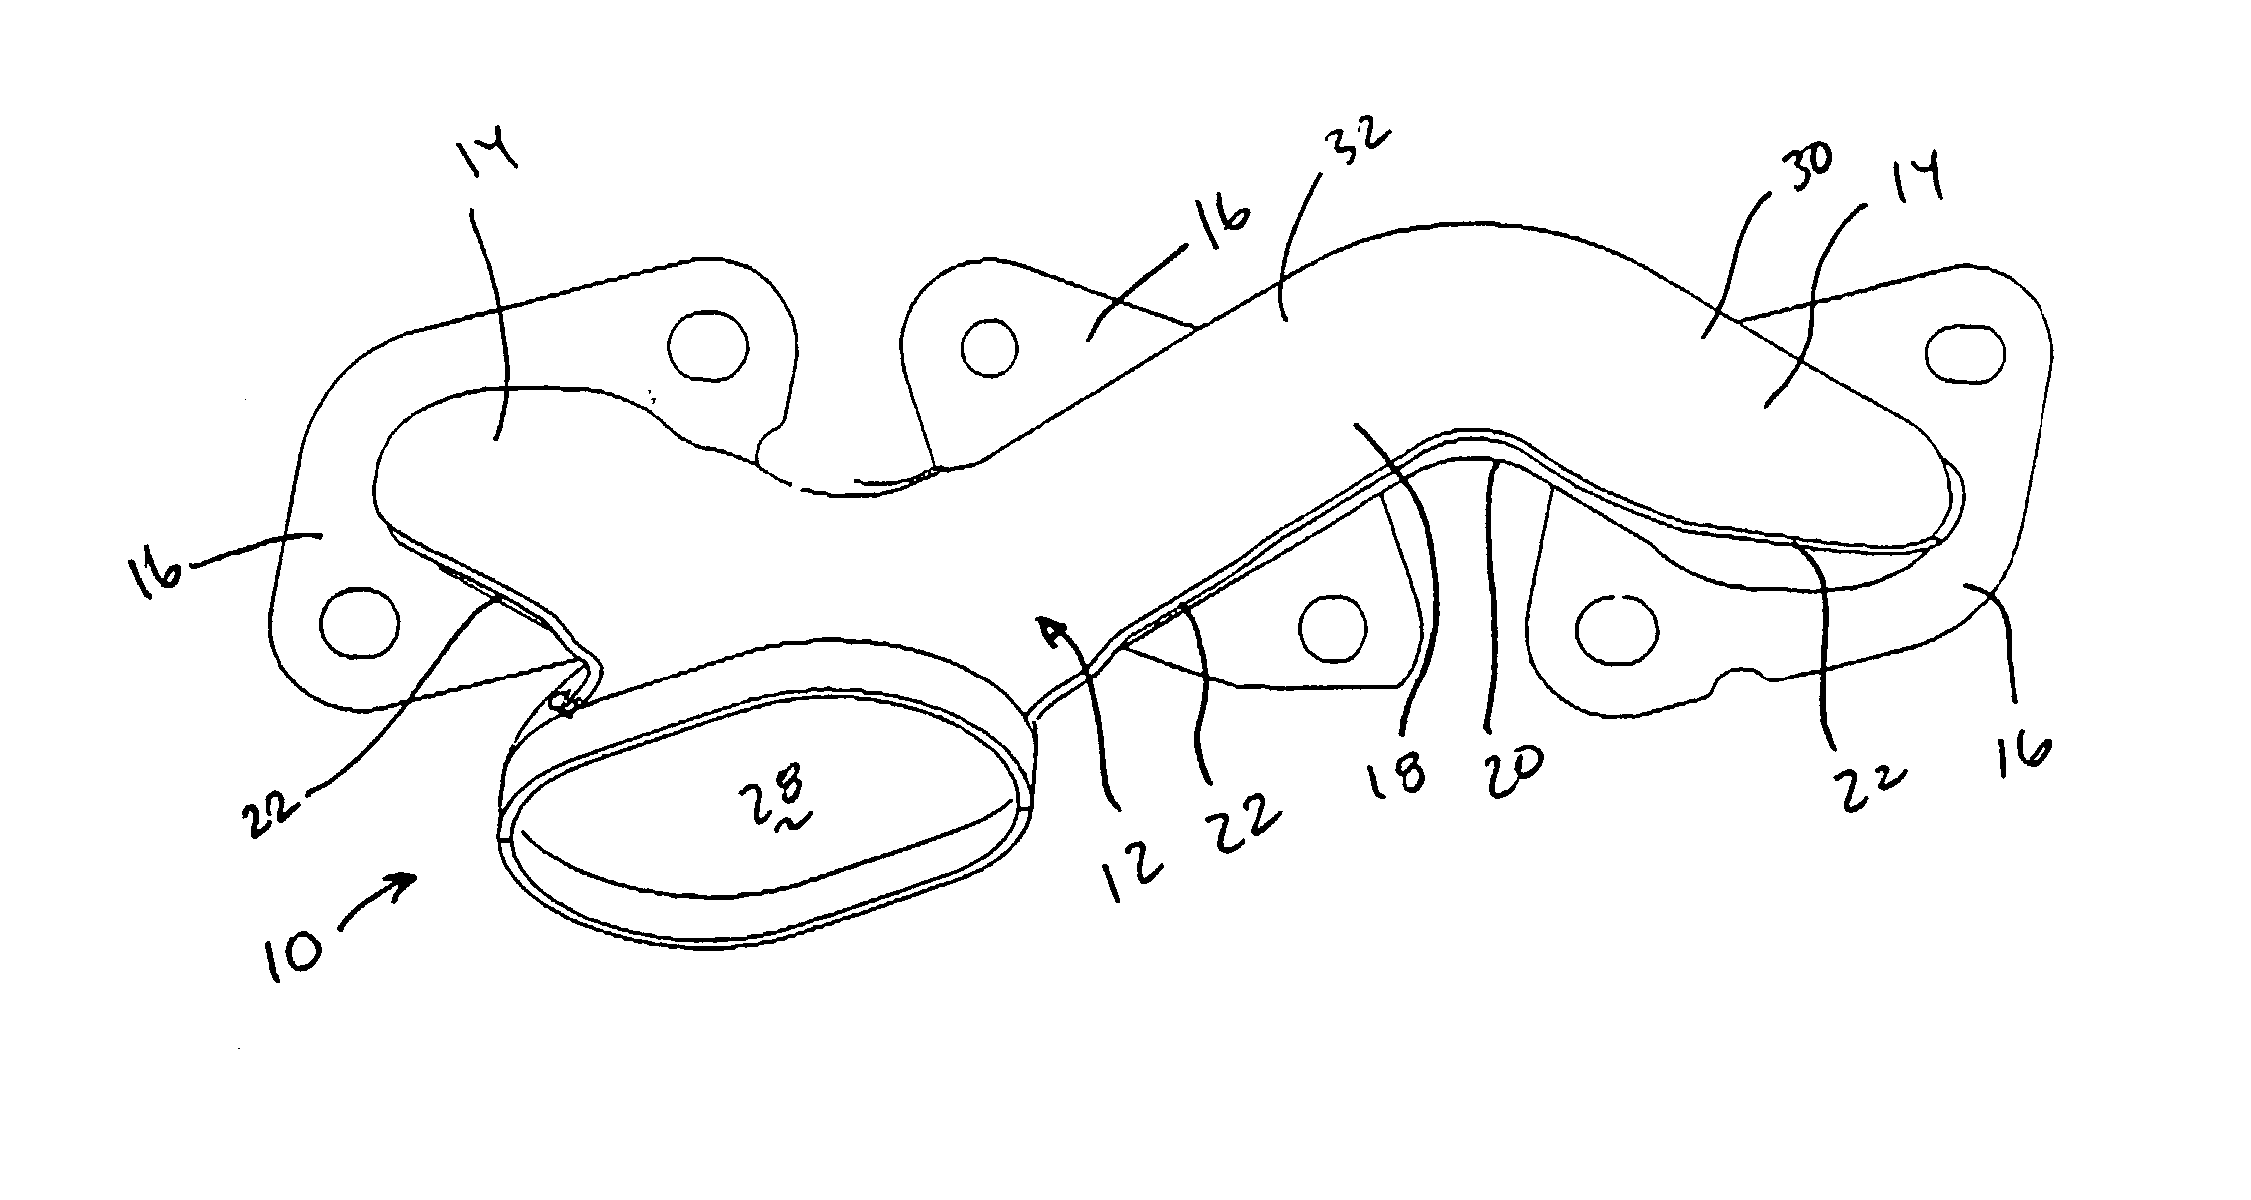 Stamped exhausts manifold for vehicle engines